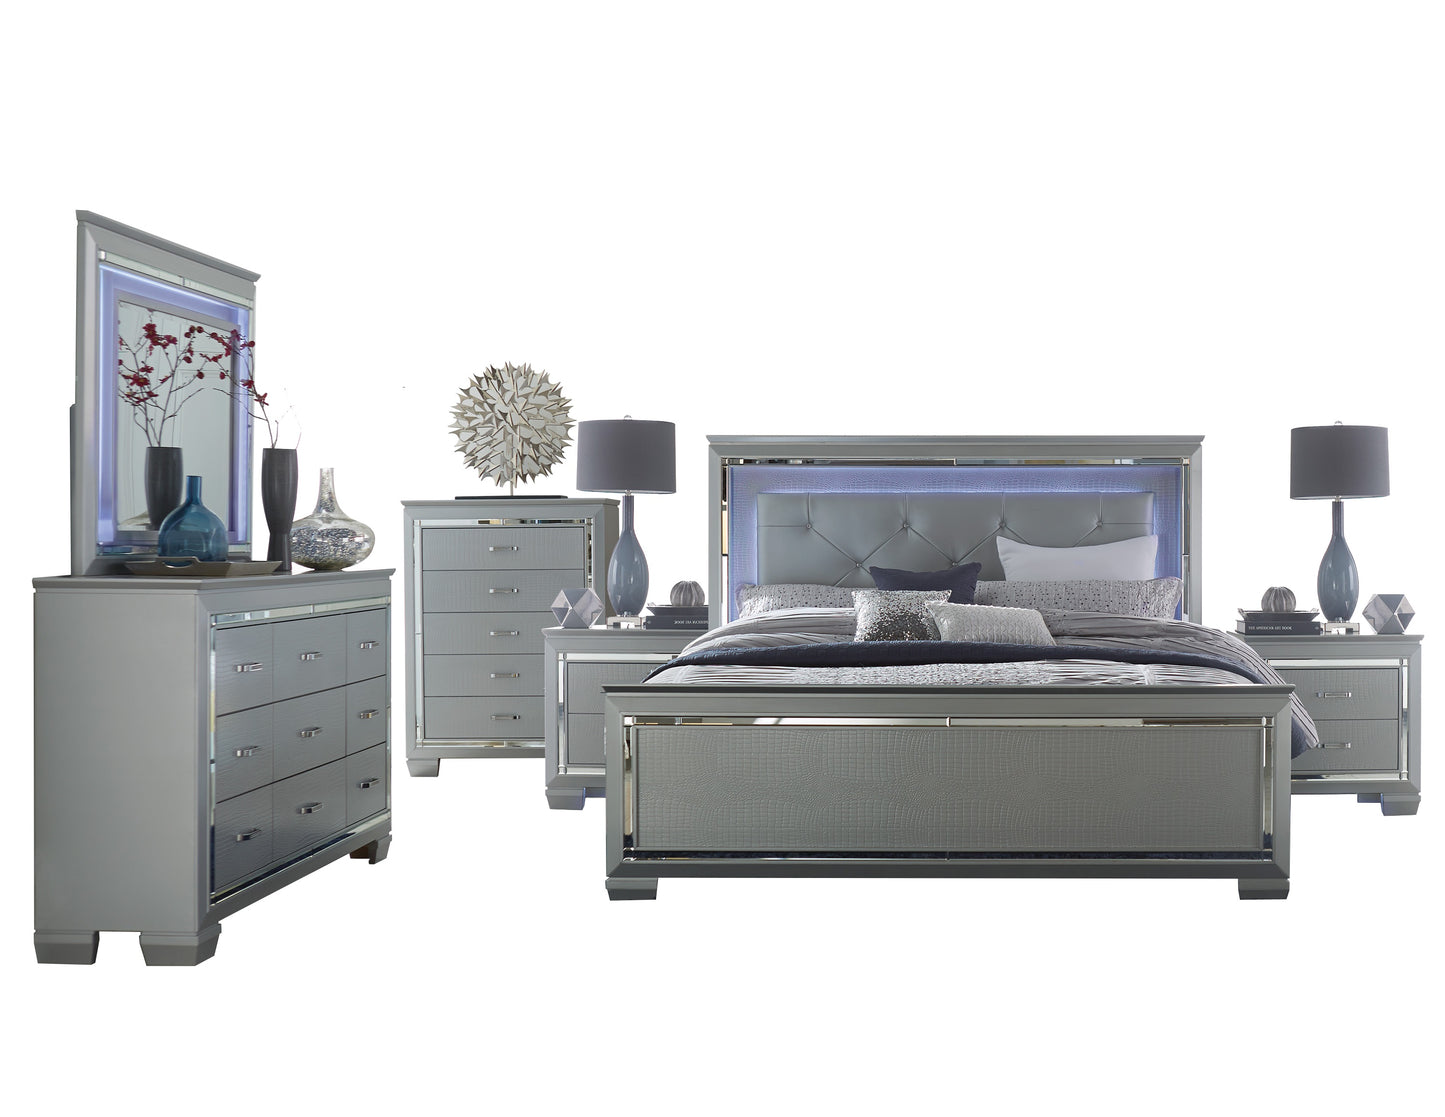 Almada 6PC Bedroom Set E King LED Bed, Dresser, Mirror, 2 Nightstand, Chest in Silver Alligator Embossed